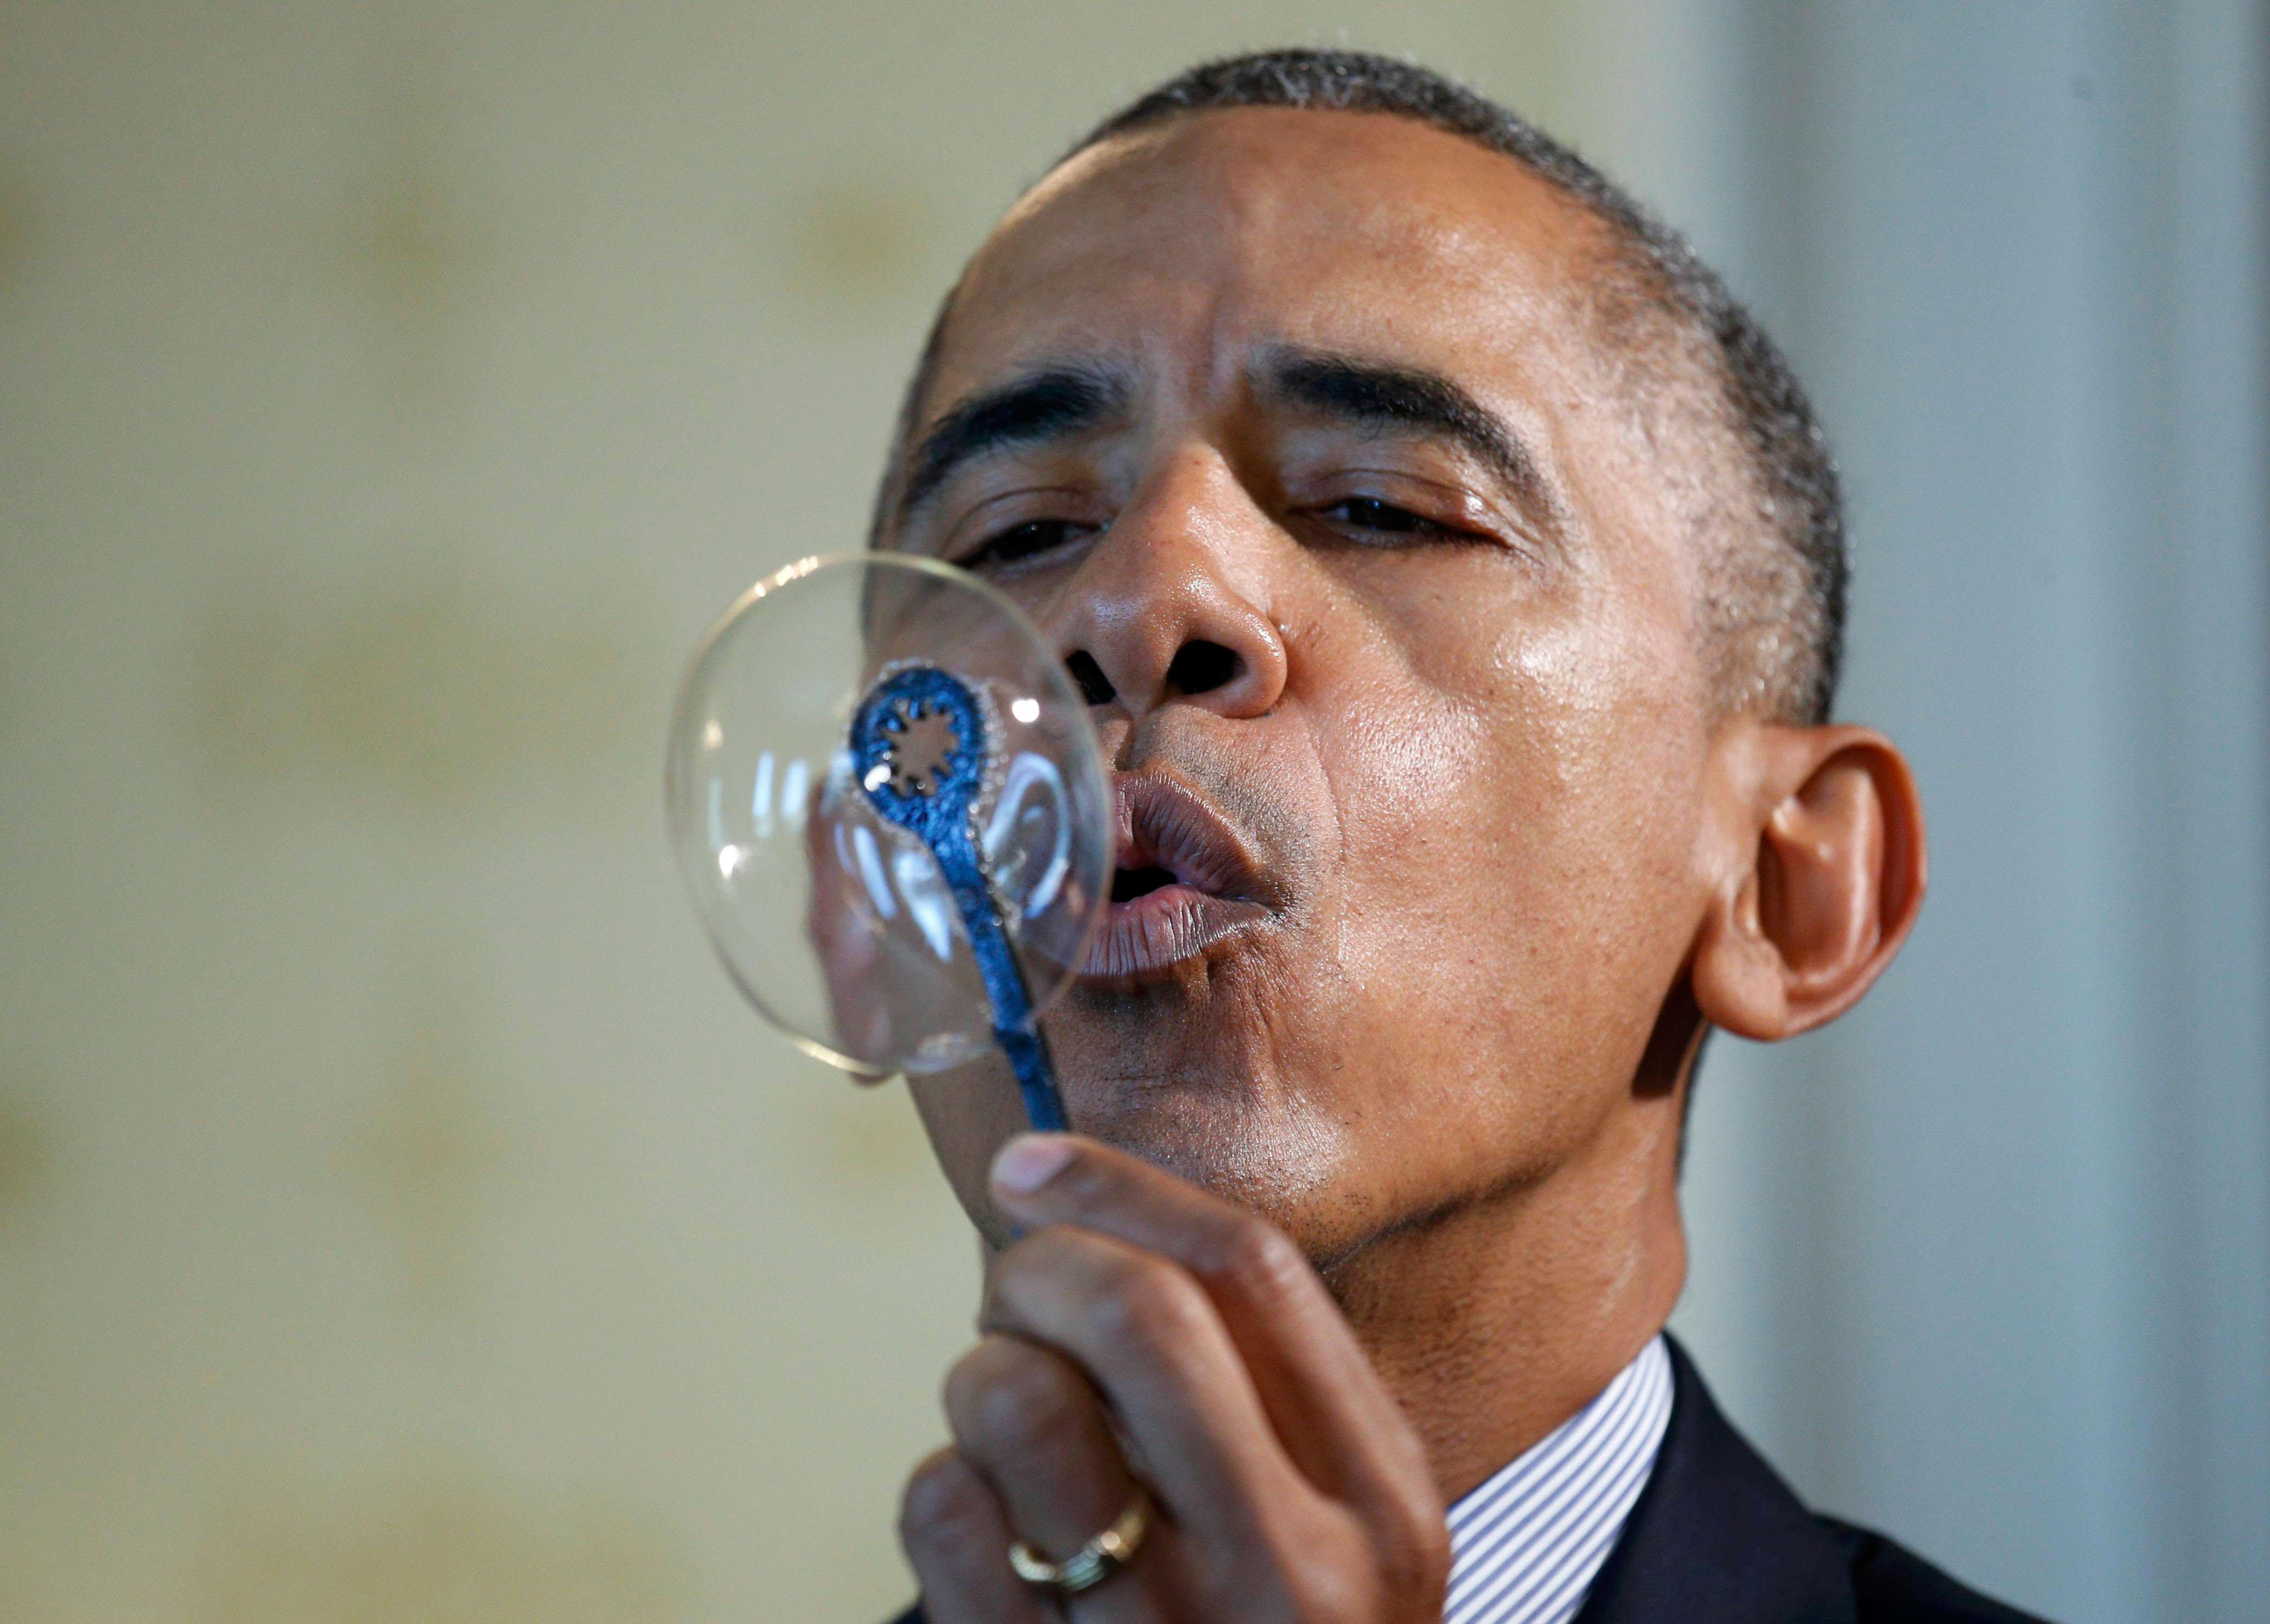 U.S. President Obama blows bubbles during the 2016 White House Science Fair in Washhington